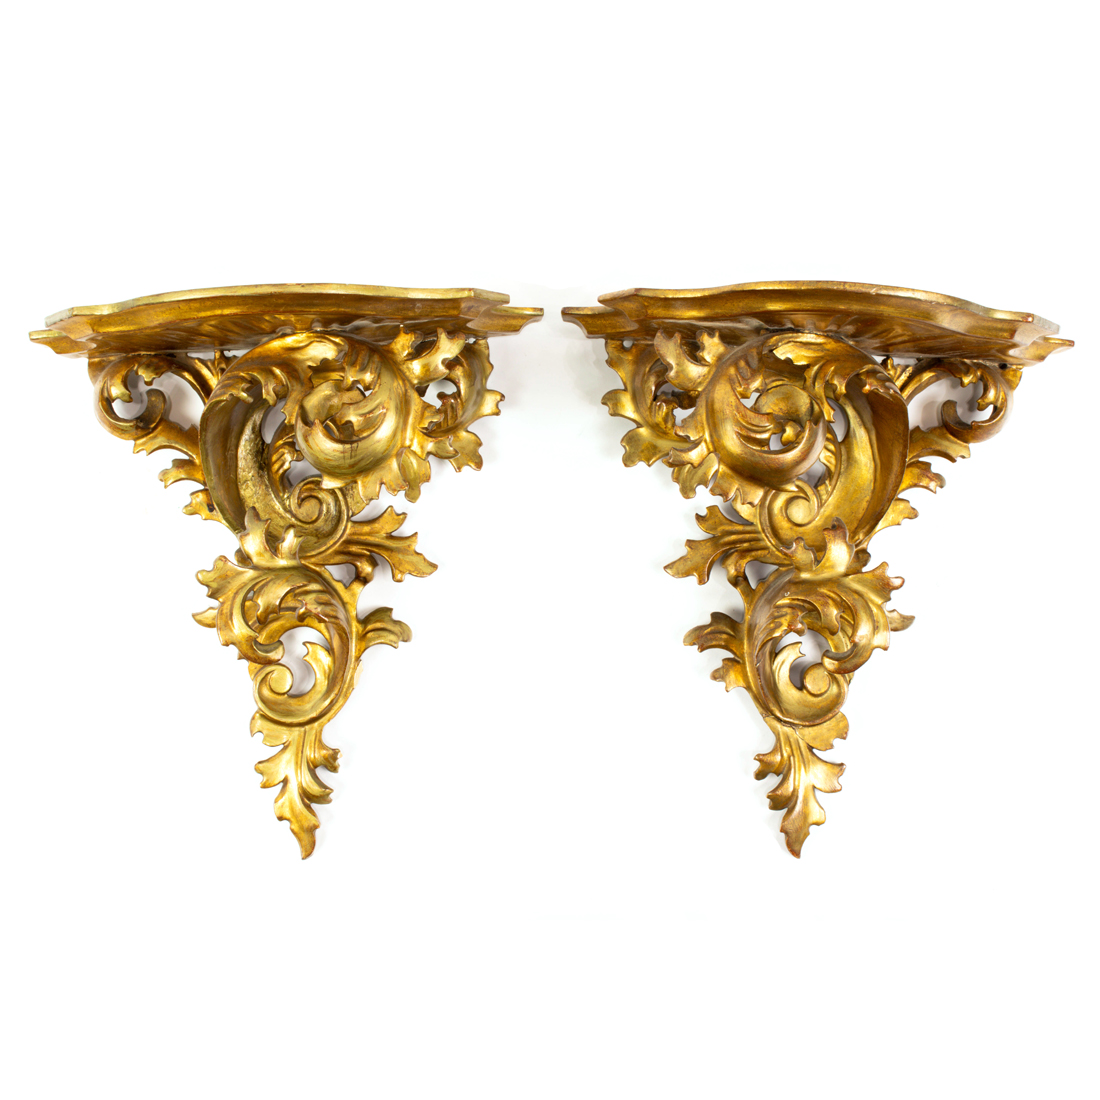 PAIR OF ITALIAN GILTWOOD AND GESSO 3a1a96